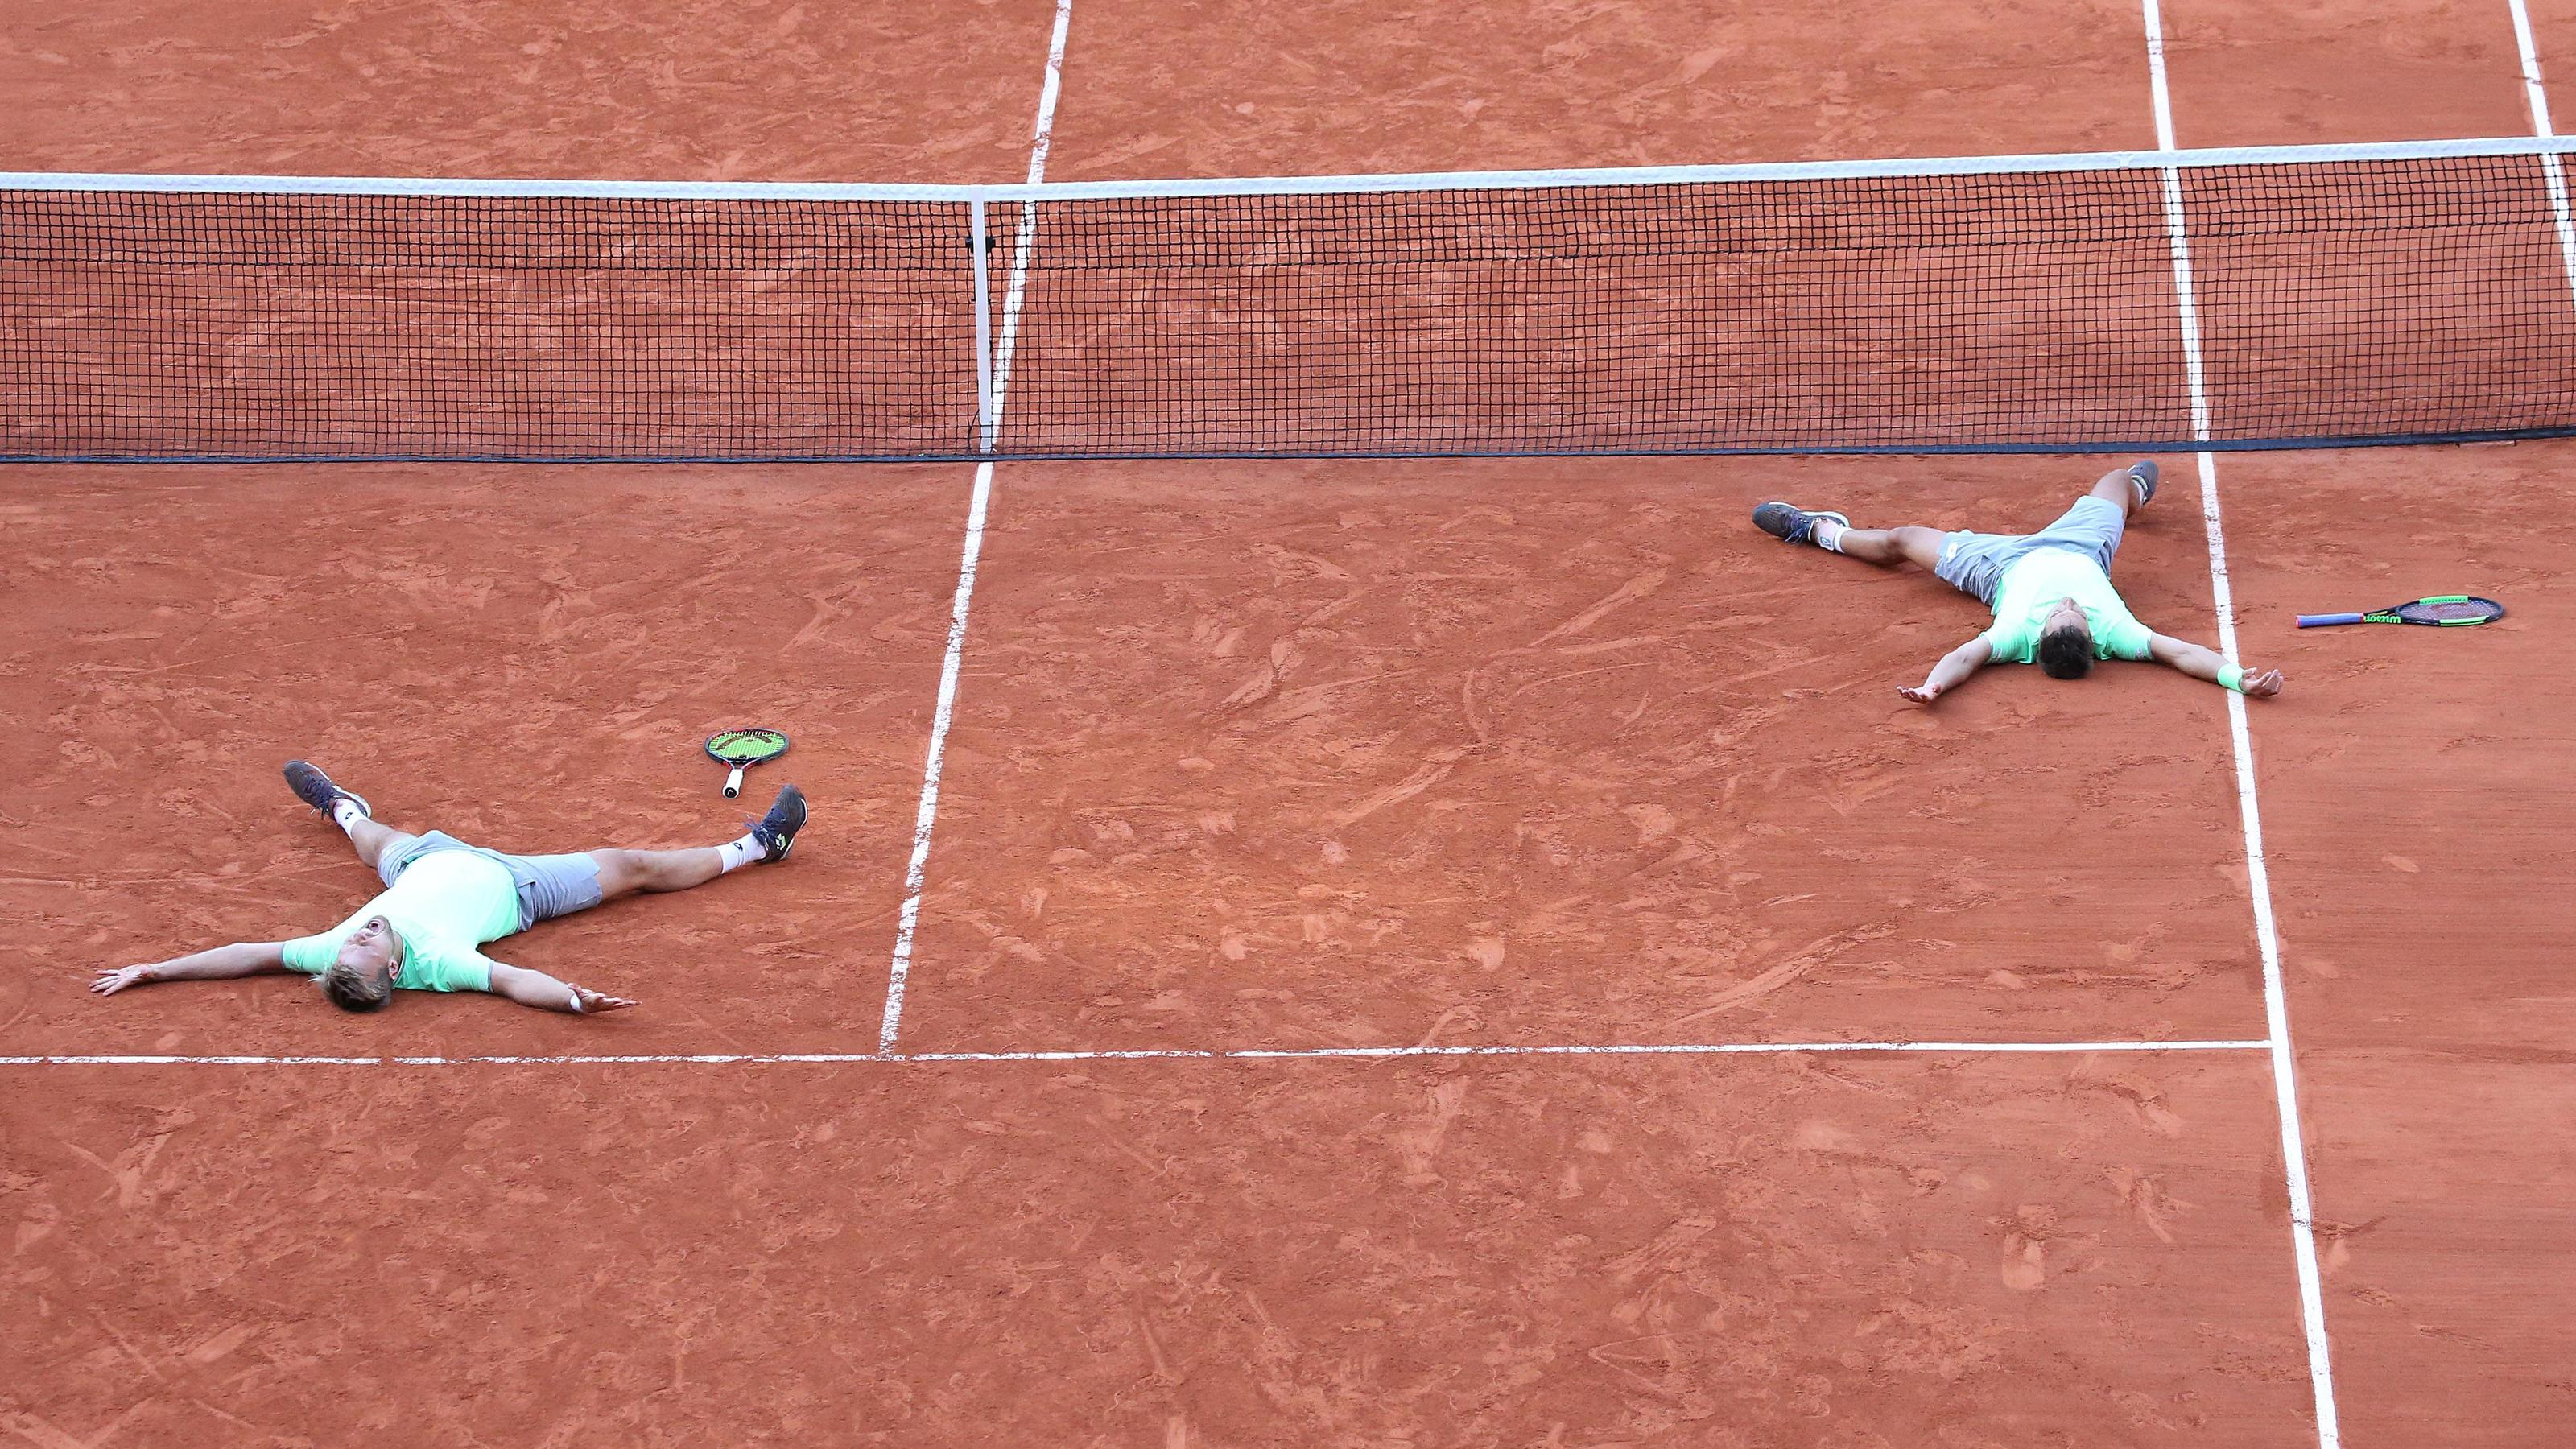 Kevin Krawietz (bright hair) and Andreas Mies (dark hair), GER, after doubles final of 2019 French Open at Roland Garros, Paris, 08/06/2019; - *** Kevin Krawietz bright hair and Andreas Mies dark hair , GER, after doubles final of 2019 French Open at